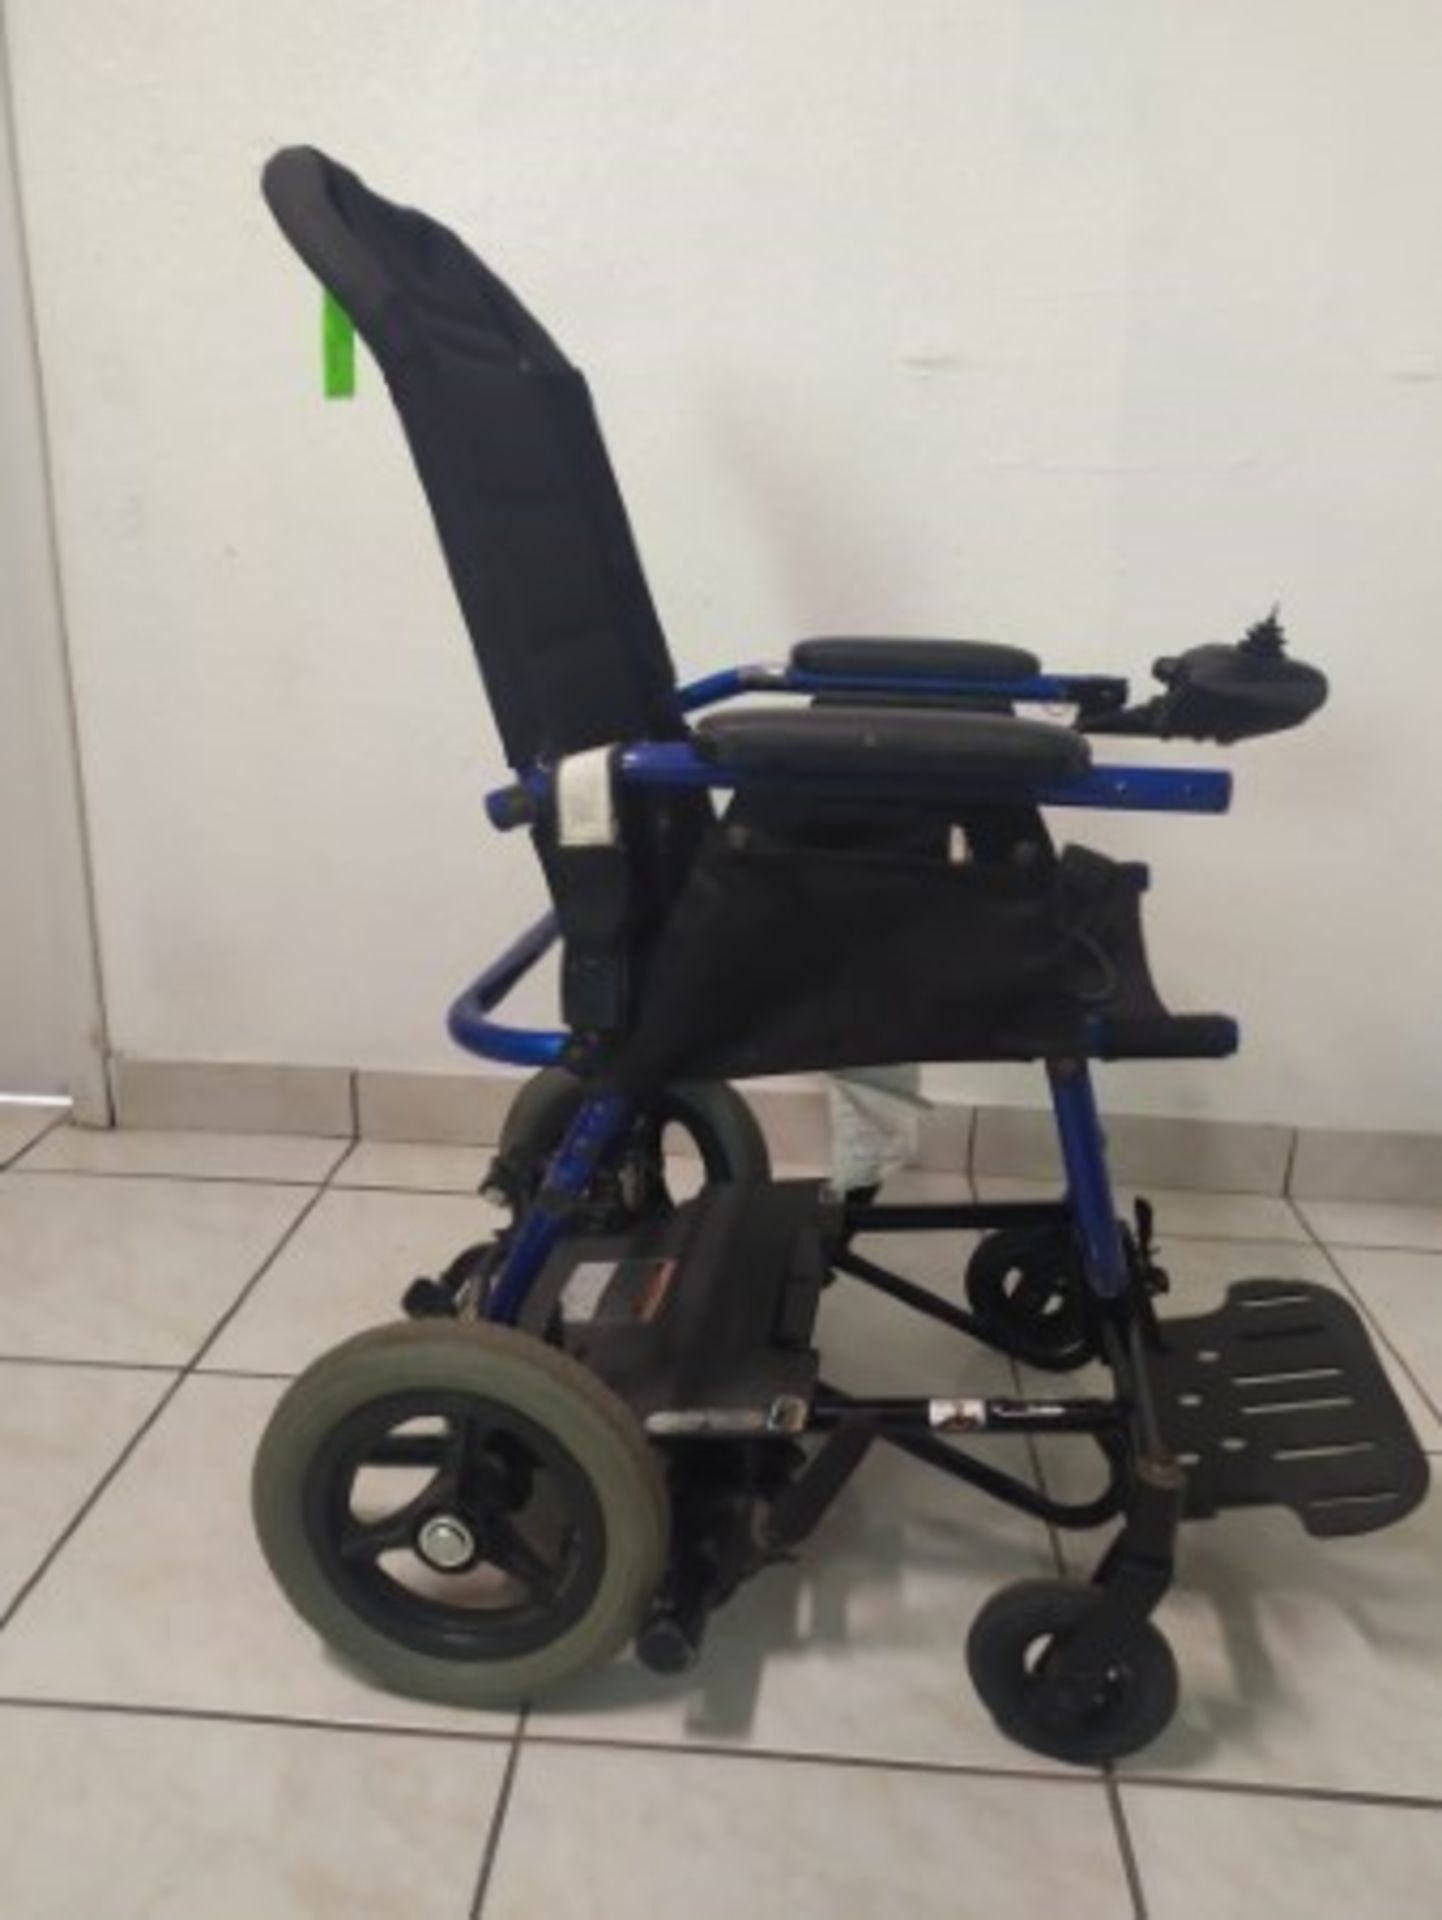 2003 INVACARE ATM1816B 4-WHEEL POWER CHAIR - DISASSEMBLABLE - BLACK WITH BLUE - 250LB CAPACITY - SE - Image 3 of 6